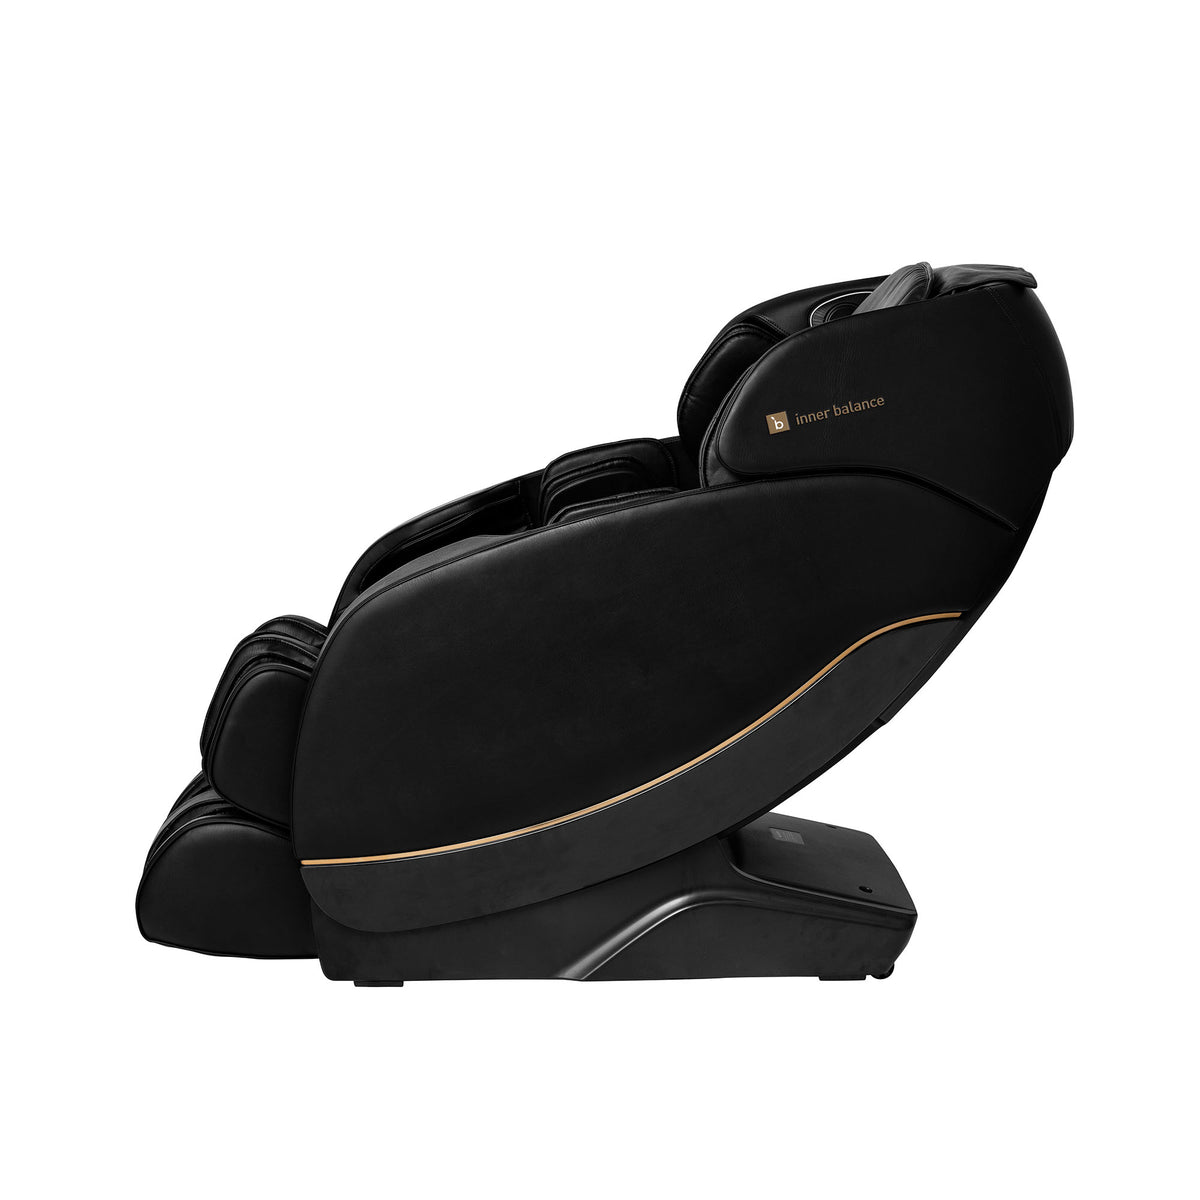 Partially reclined Inner Balance Wellness Jin 2.0 Massage Chair featuring black and gold accents